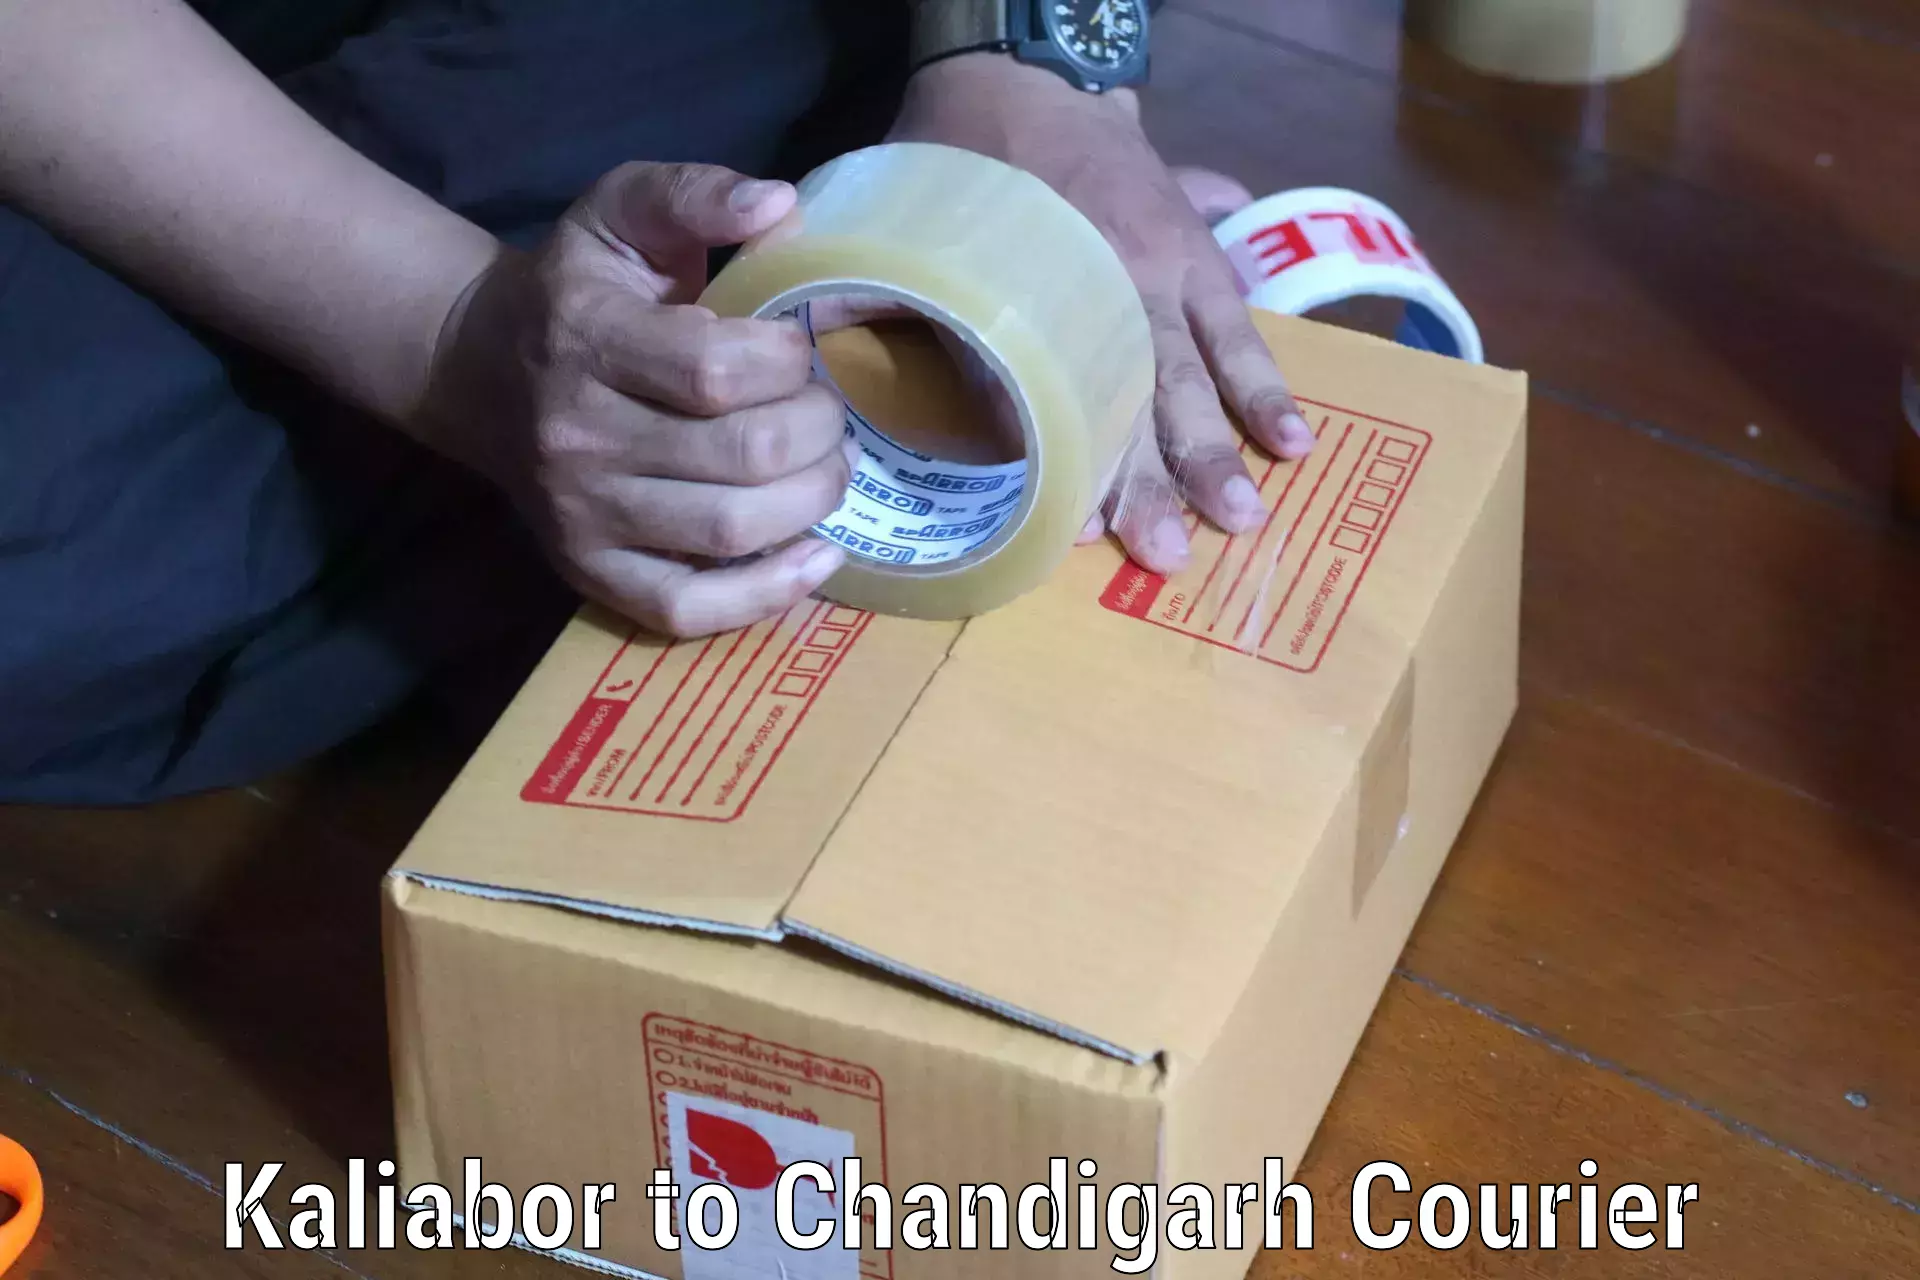 Expedited shipping methods Kaliabor to Chandigarh